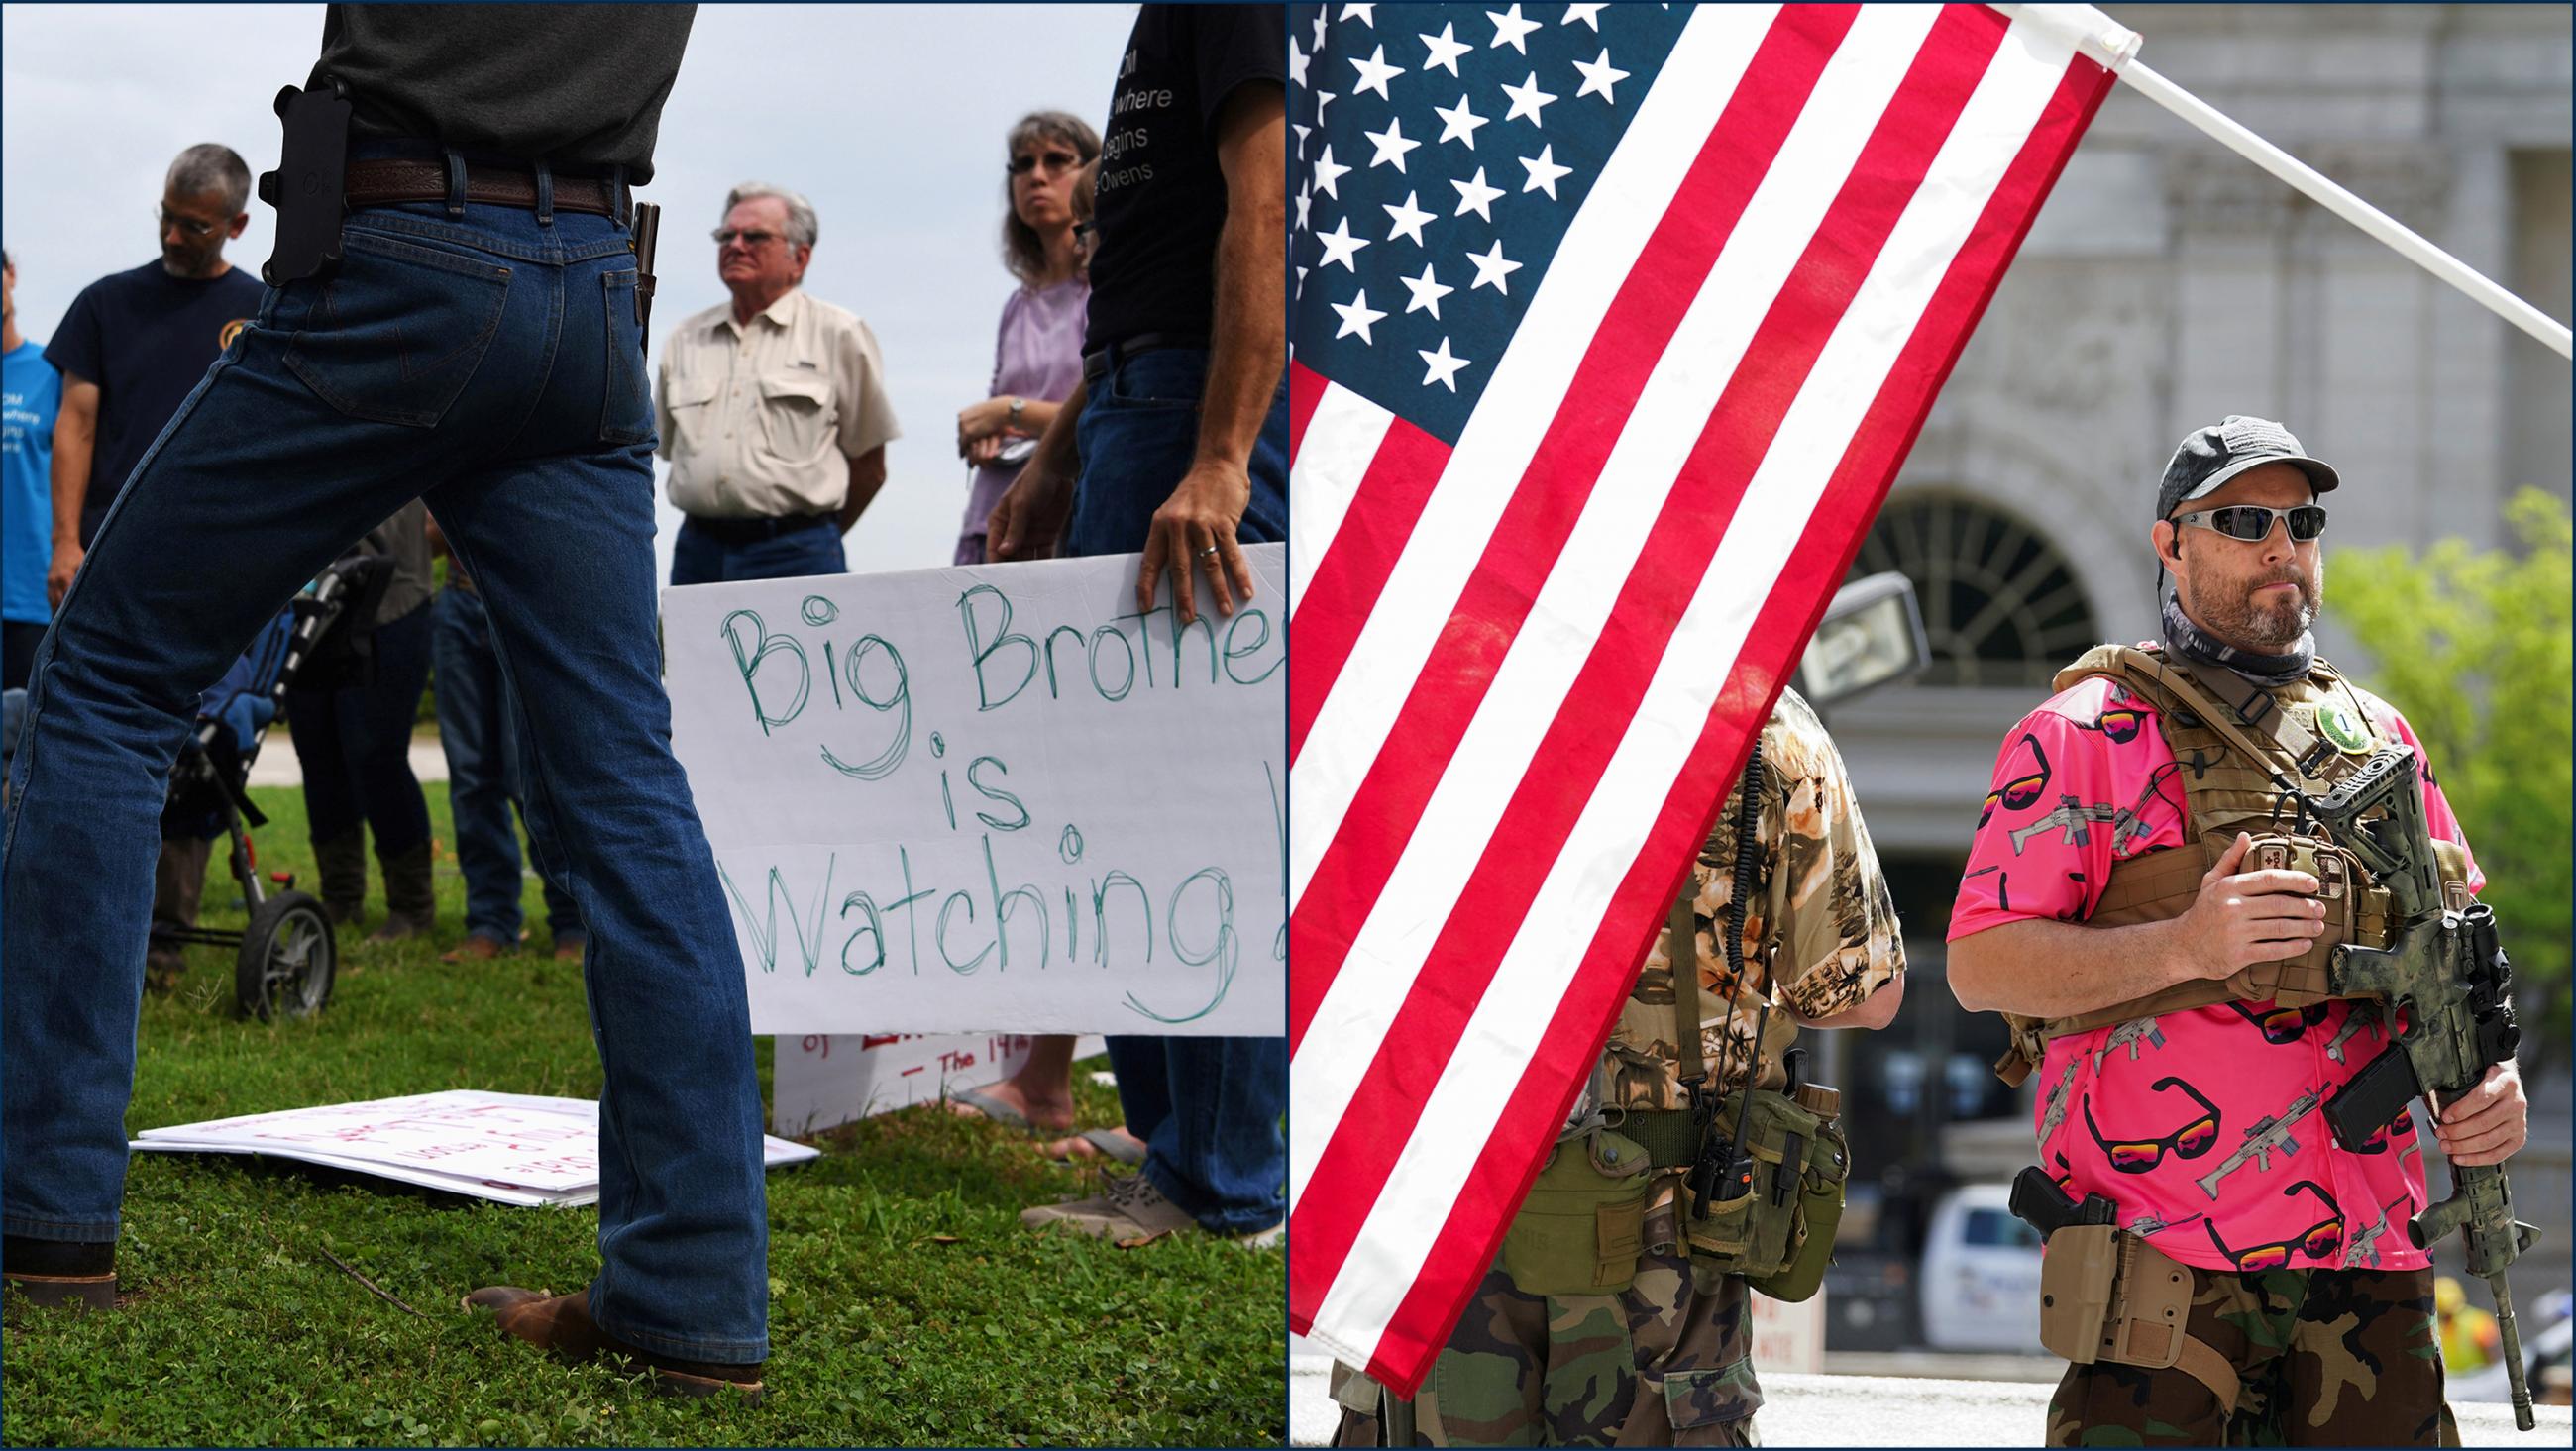 The image is a split screen showing on the right a small group gathered around holding signs, one of which says "Big Brother is Watching." The left image is of a demonstration where a protestor is heavily armed and standing on the steps of a state house. The photo shows 